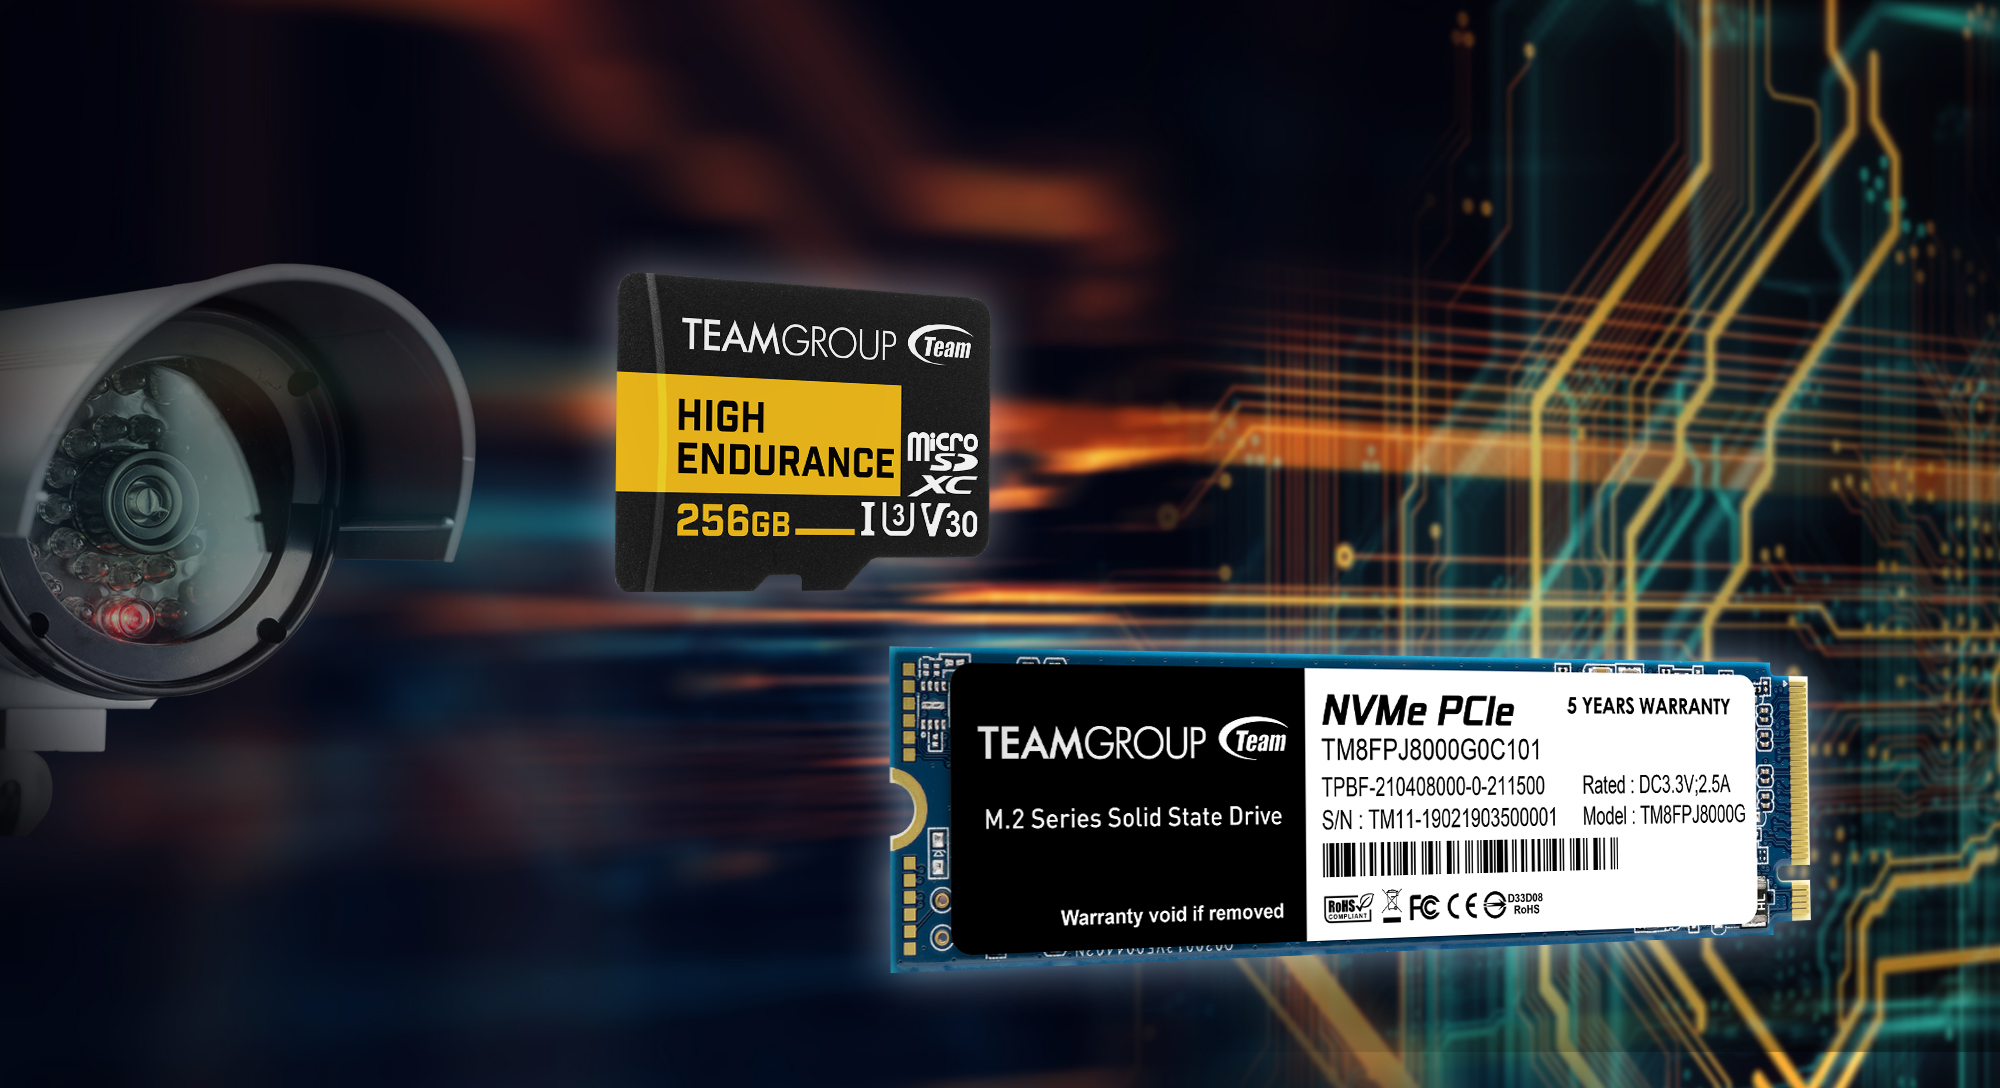 TEAMGROUP Announces the 8TB MP34Q M.2 PCIe SSD and HIGH ENDURANCE Surveillance System Memory Card,  Your Best Solutions for High-Performance Mass Storage